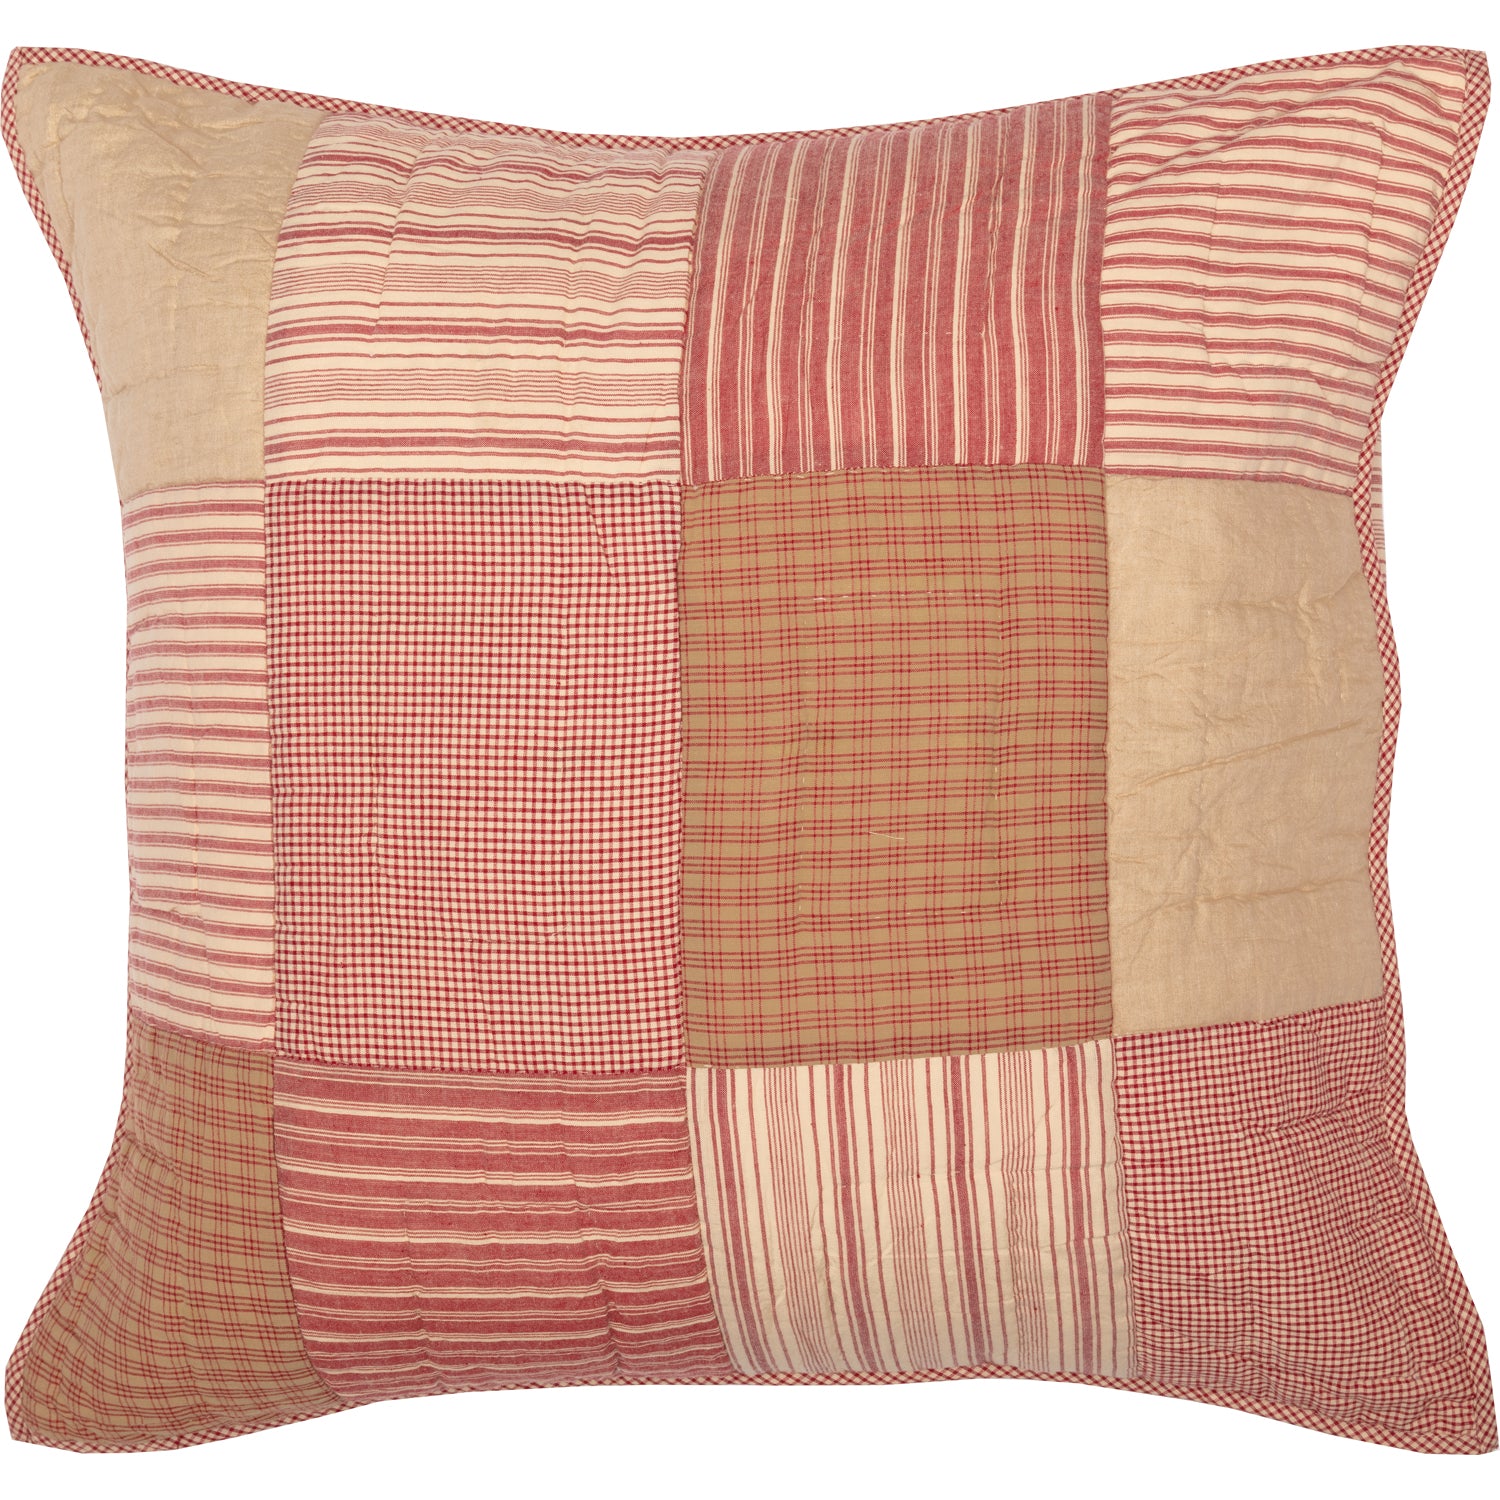 Sawyer Mill Red Quilted Euro Sham 26x26 Allysons Place